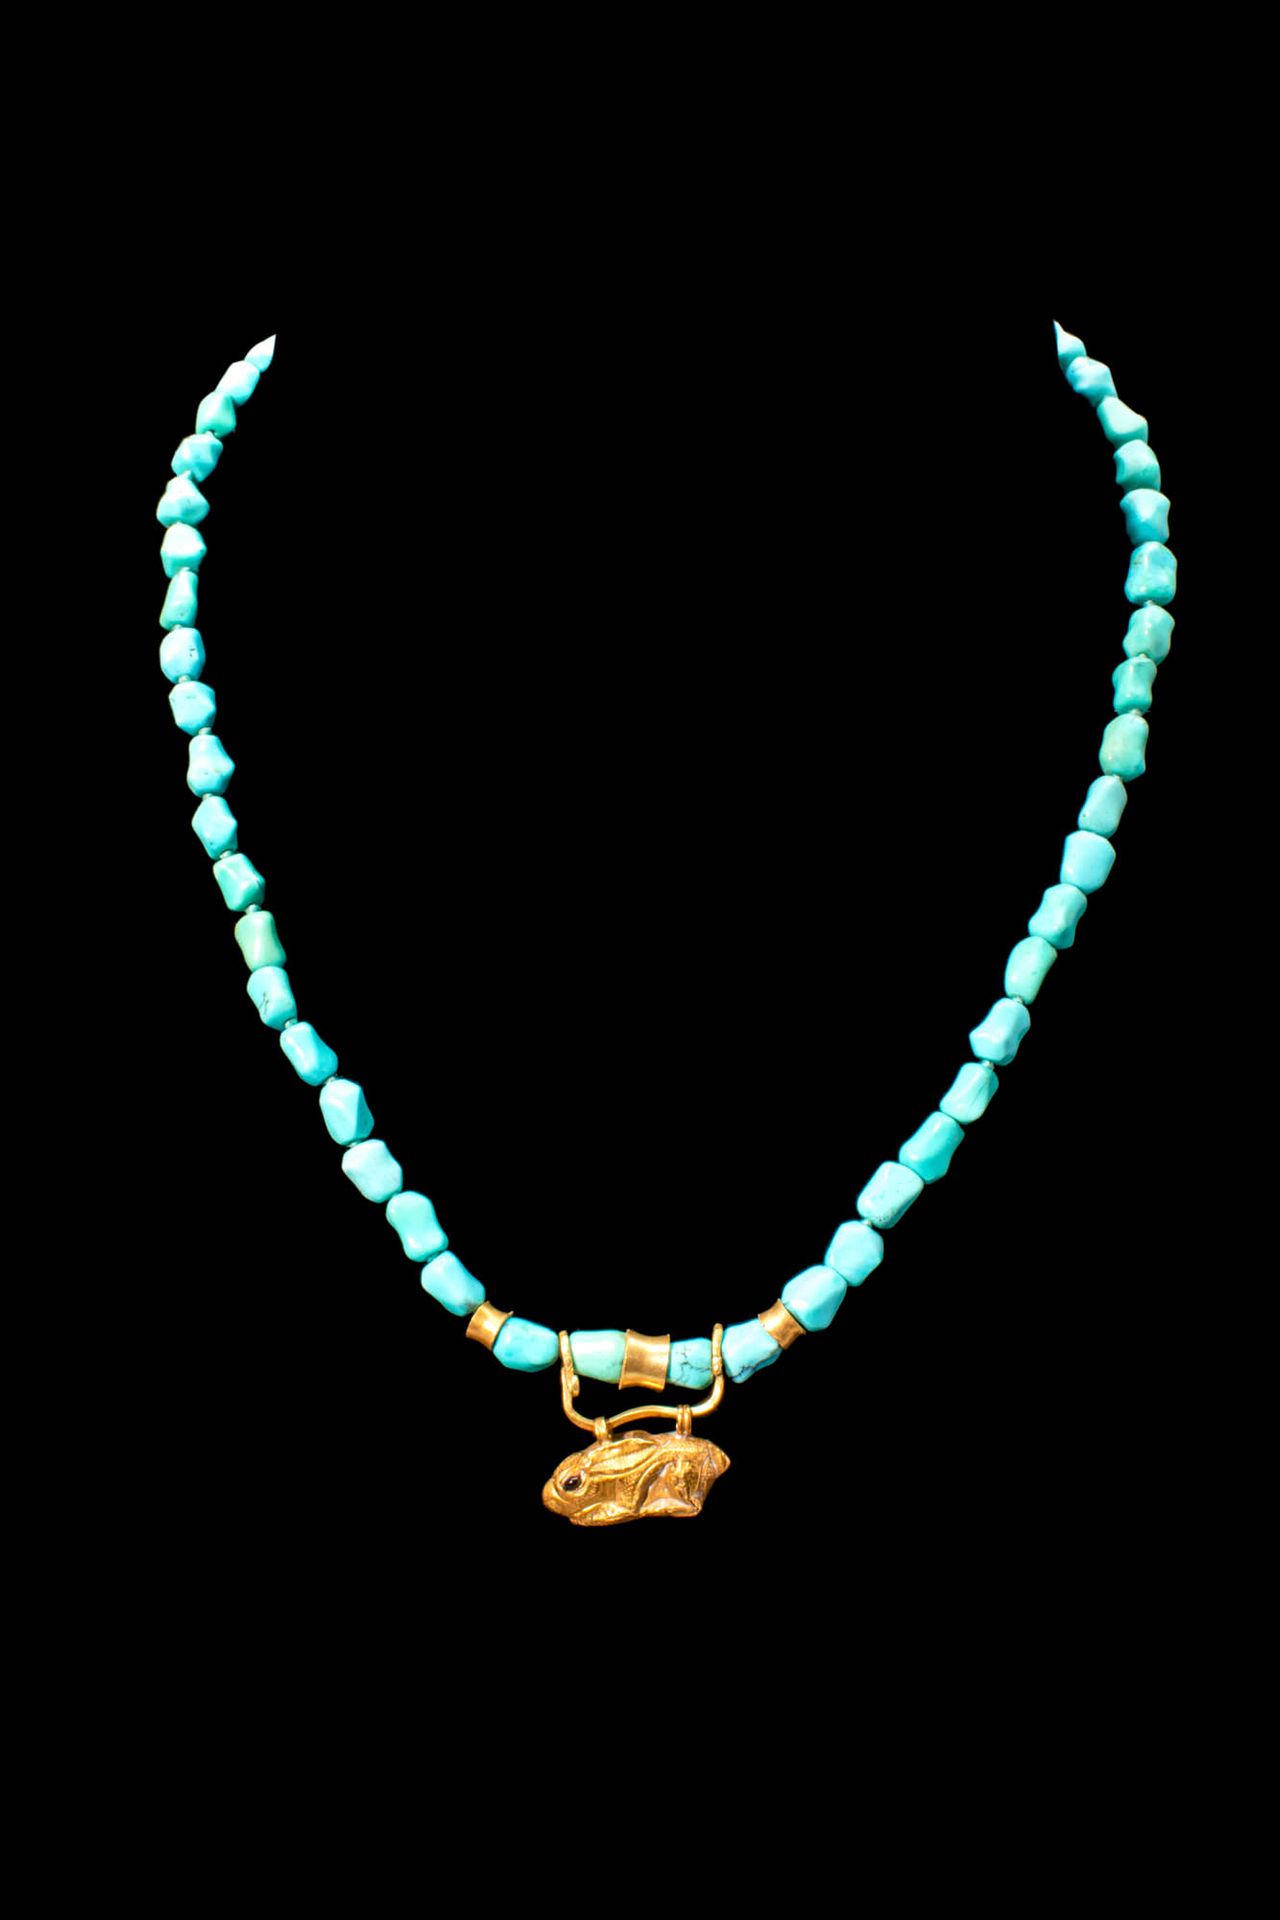 RARE EGYPTIAN TURQUOISE AND GOLD NECKLACE WITH A RABBIT PENDANT Periodo Ptolemai&hellip;